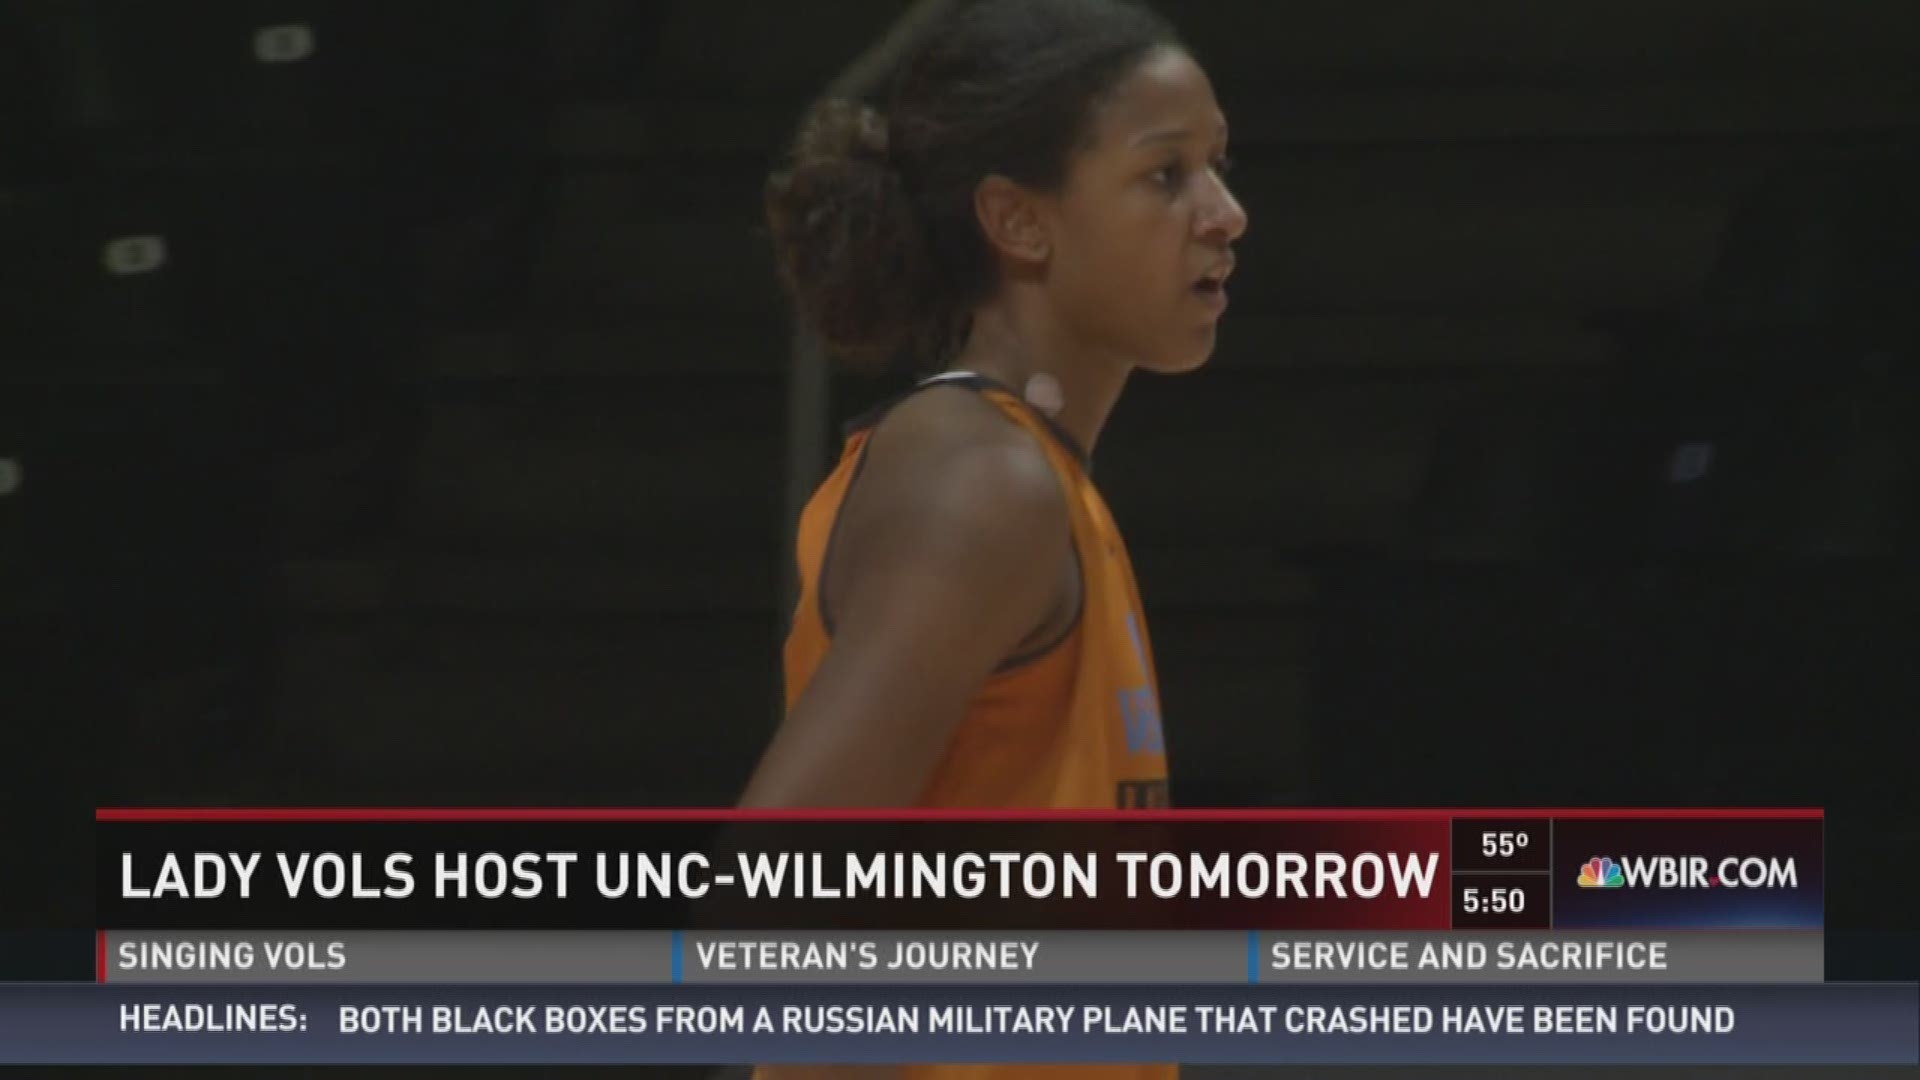 Assistant coach Dean Lockwood talked about what the Lady Vols will focus on when they host UNC-Wilmington Thursday.